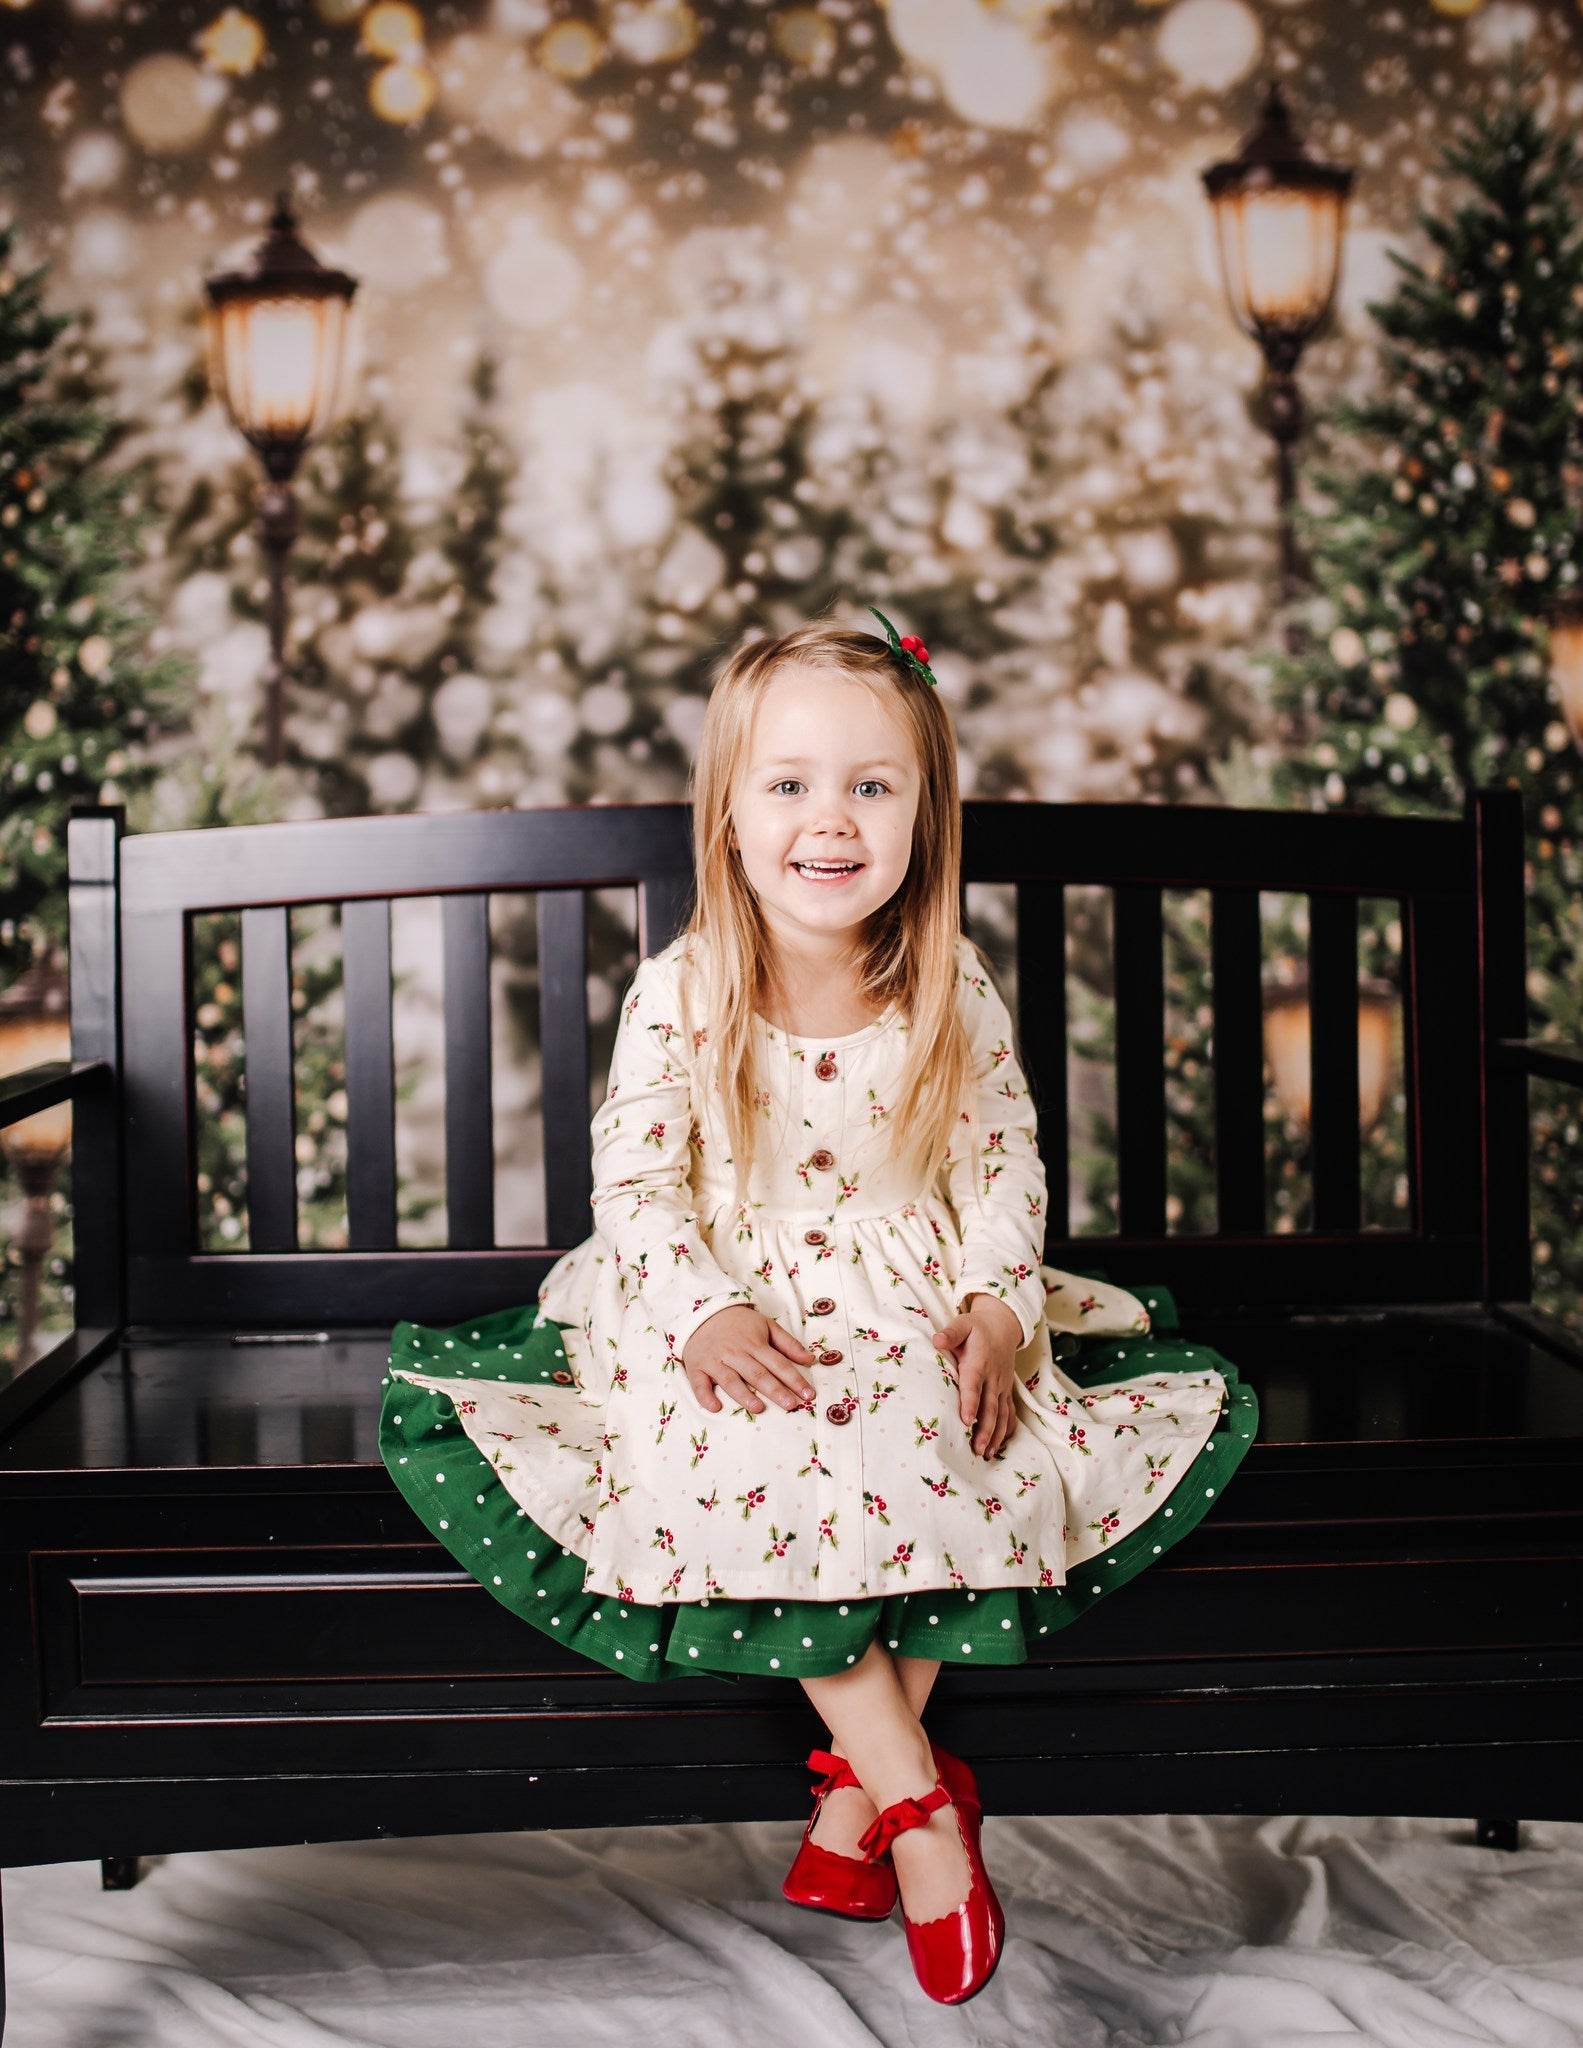 Kate Christmas Snow Forest Lights Fleece Backdrop for Photography